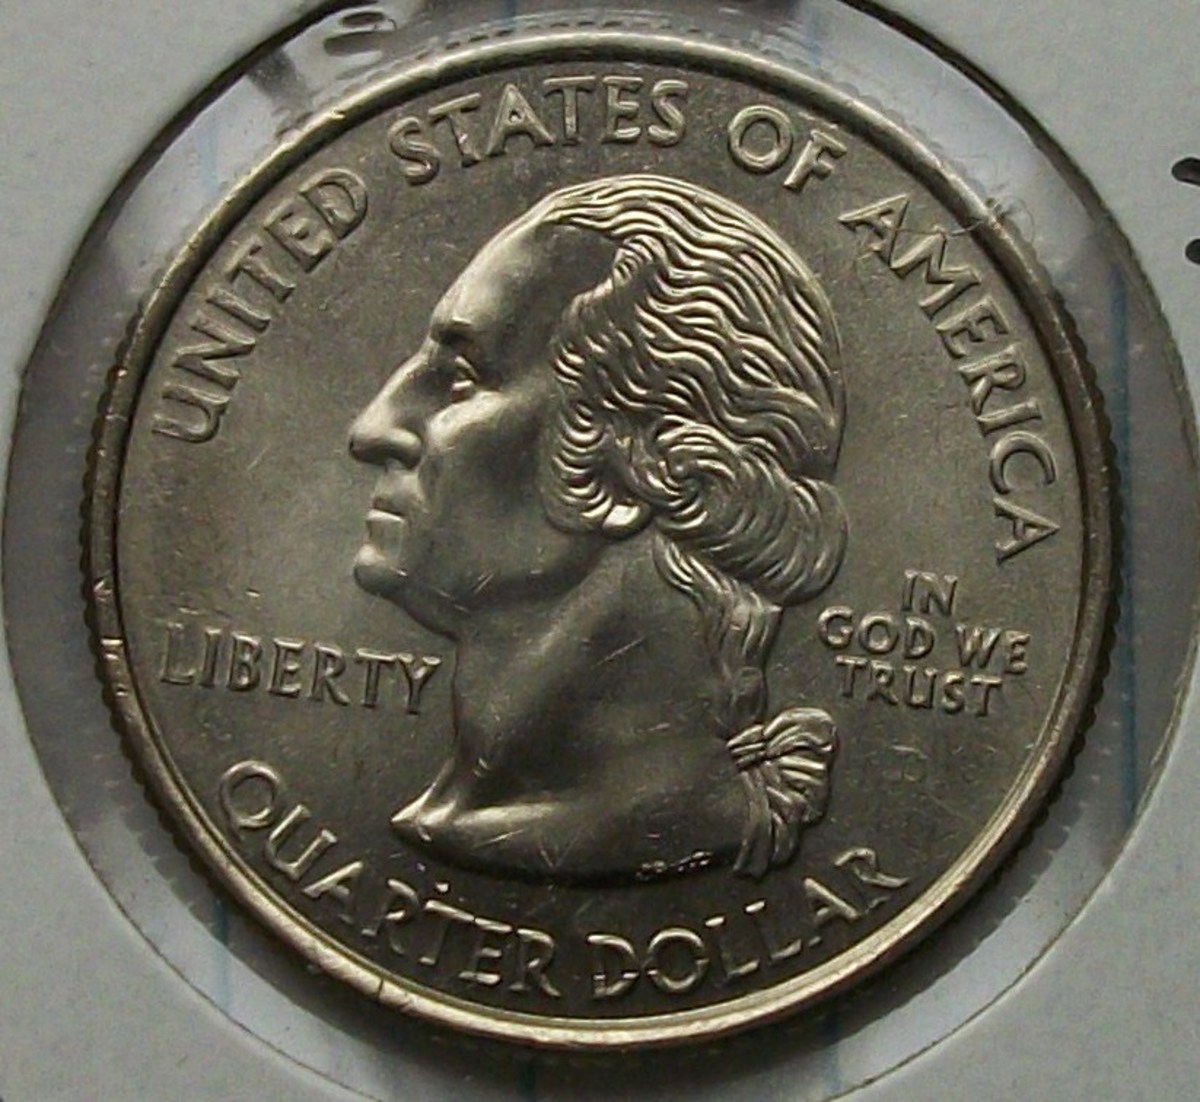 another obverse view